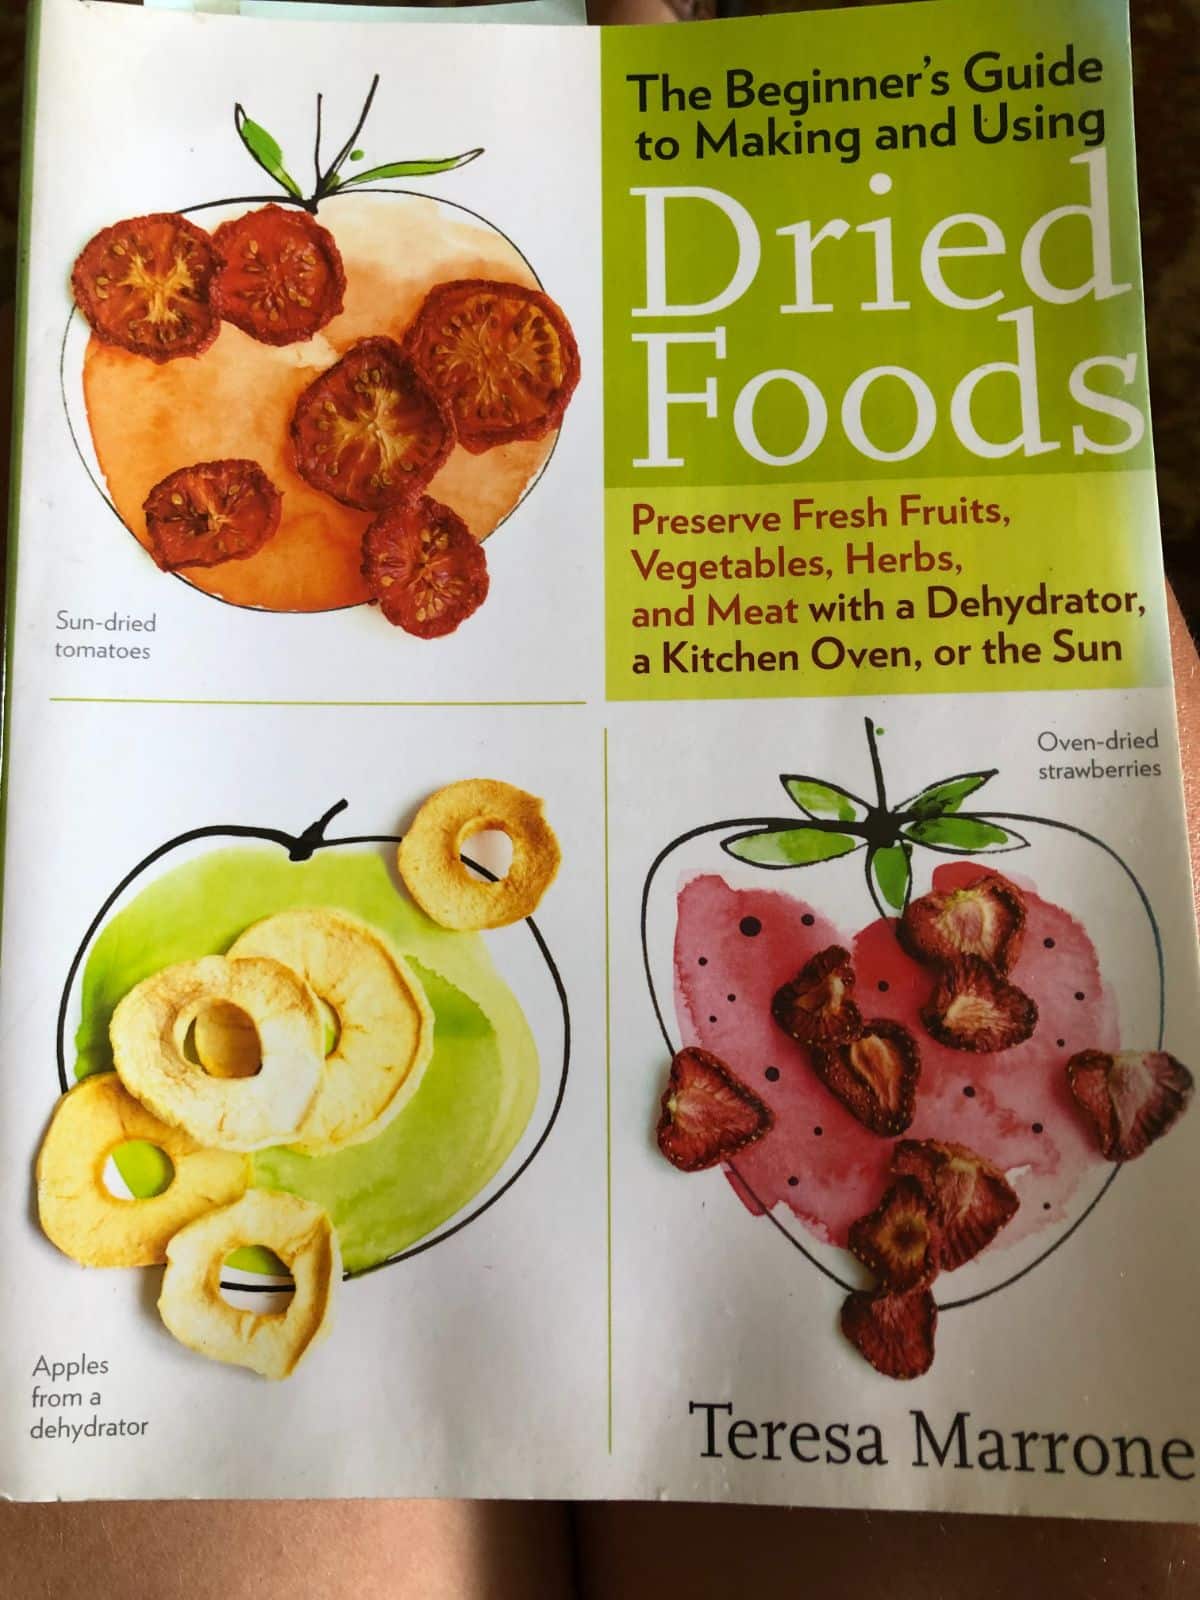 Recommended book on dehydrating